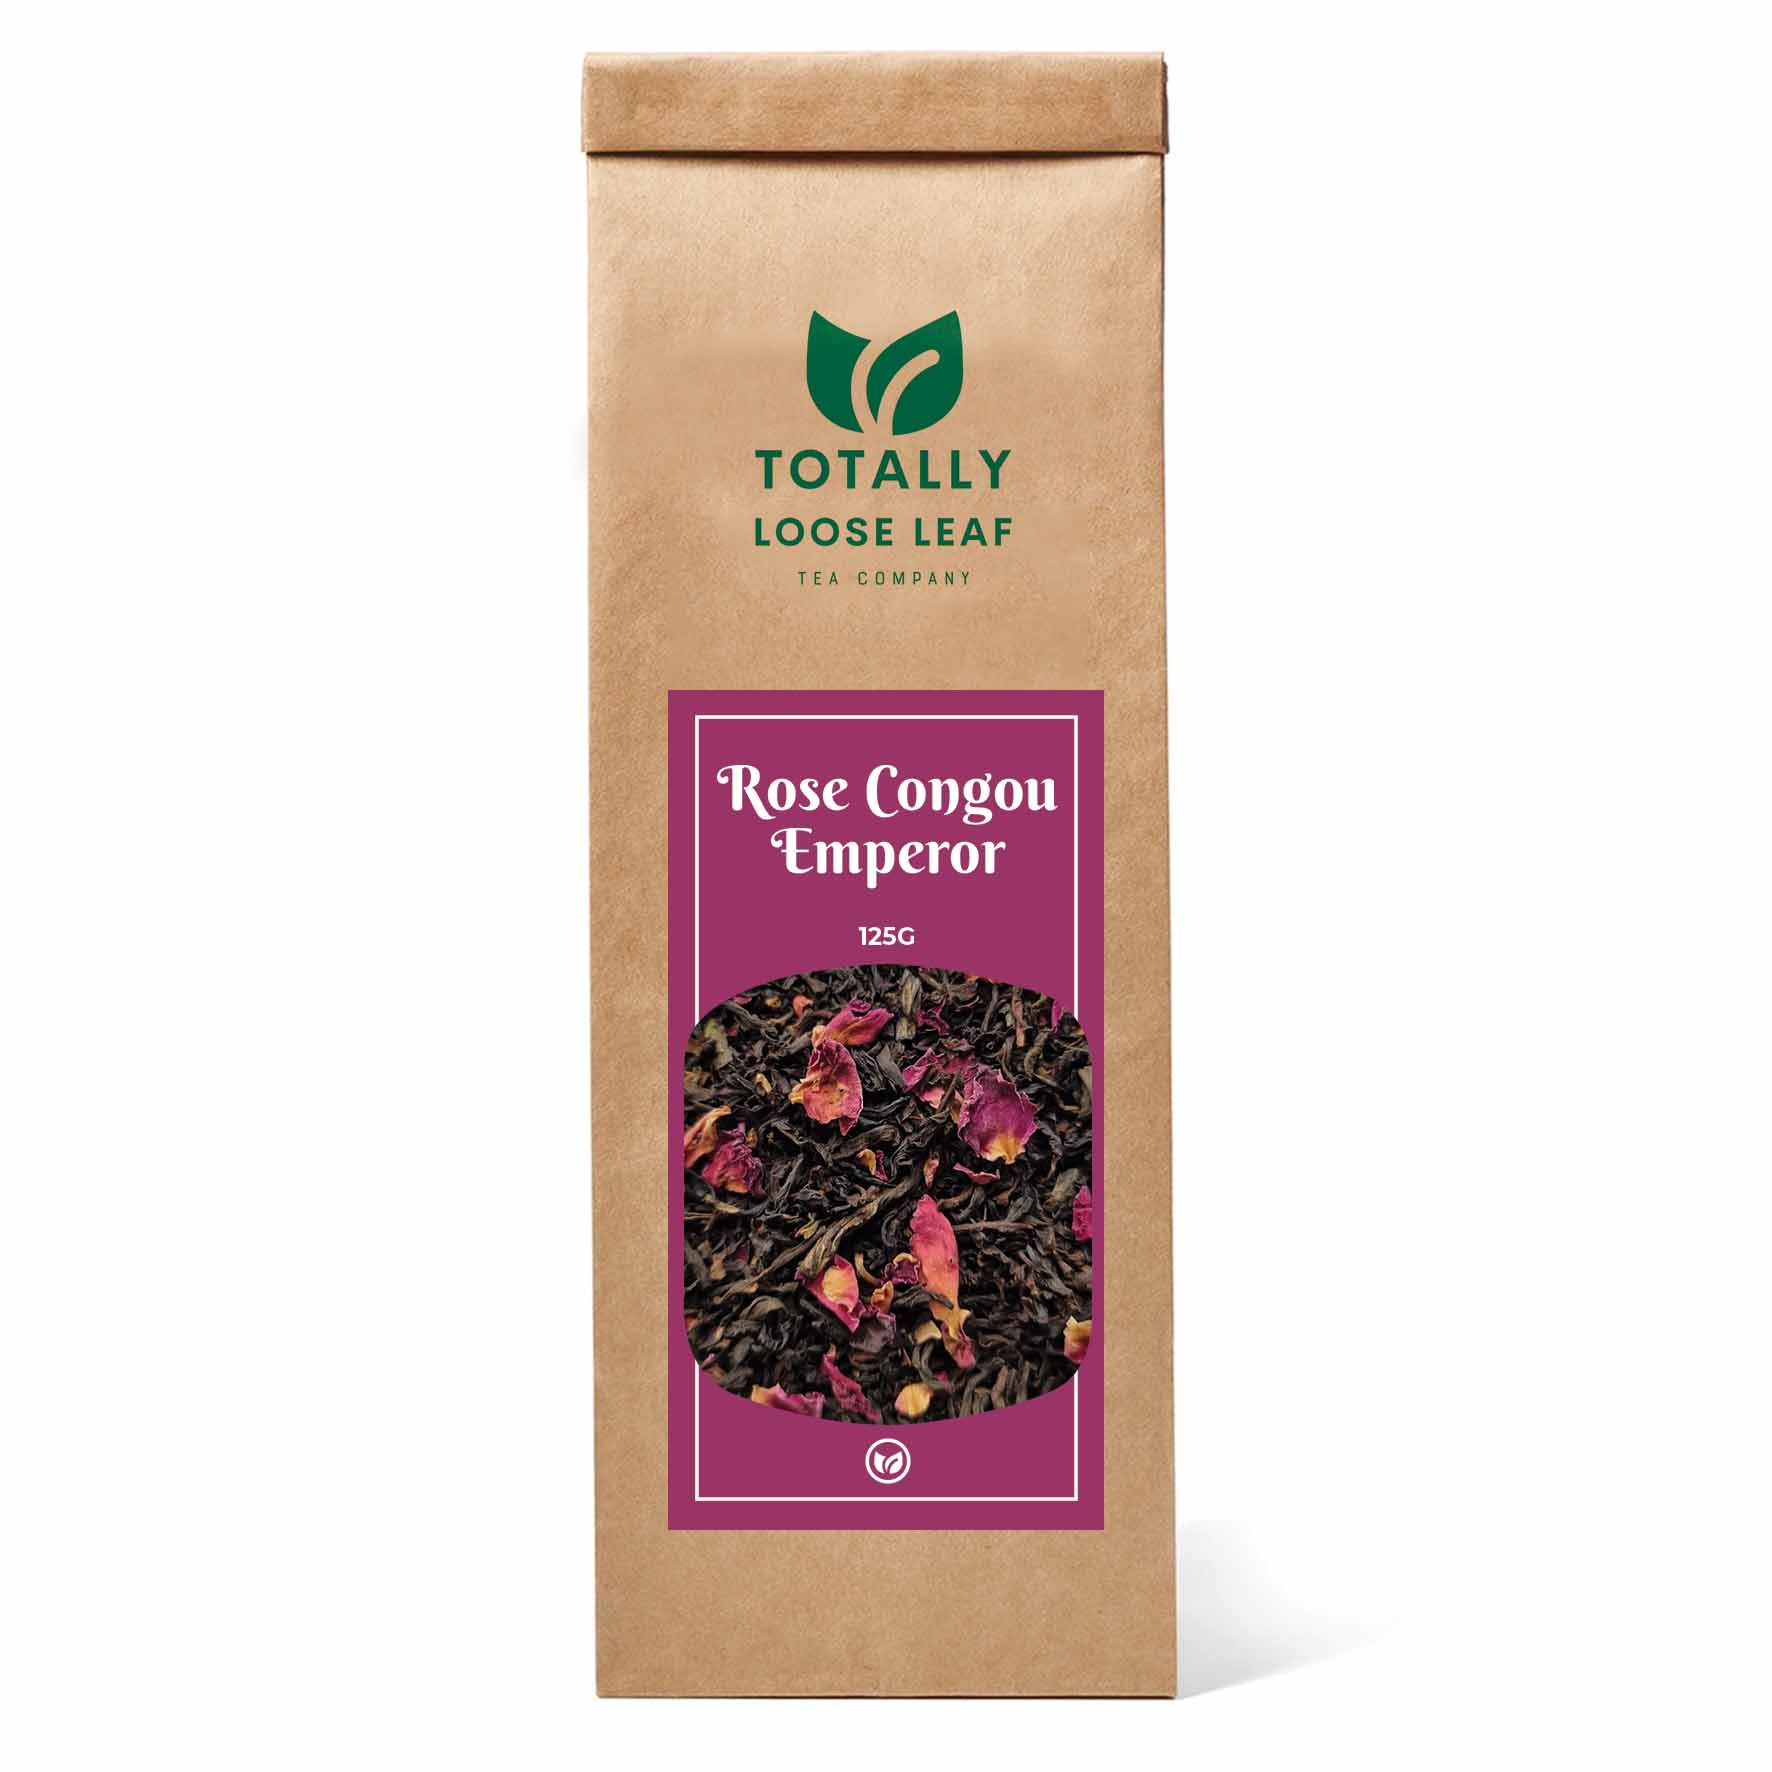 Rose Congou Emperor Afternoon Loose Leaf Tea - one pouch